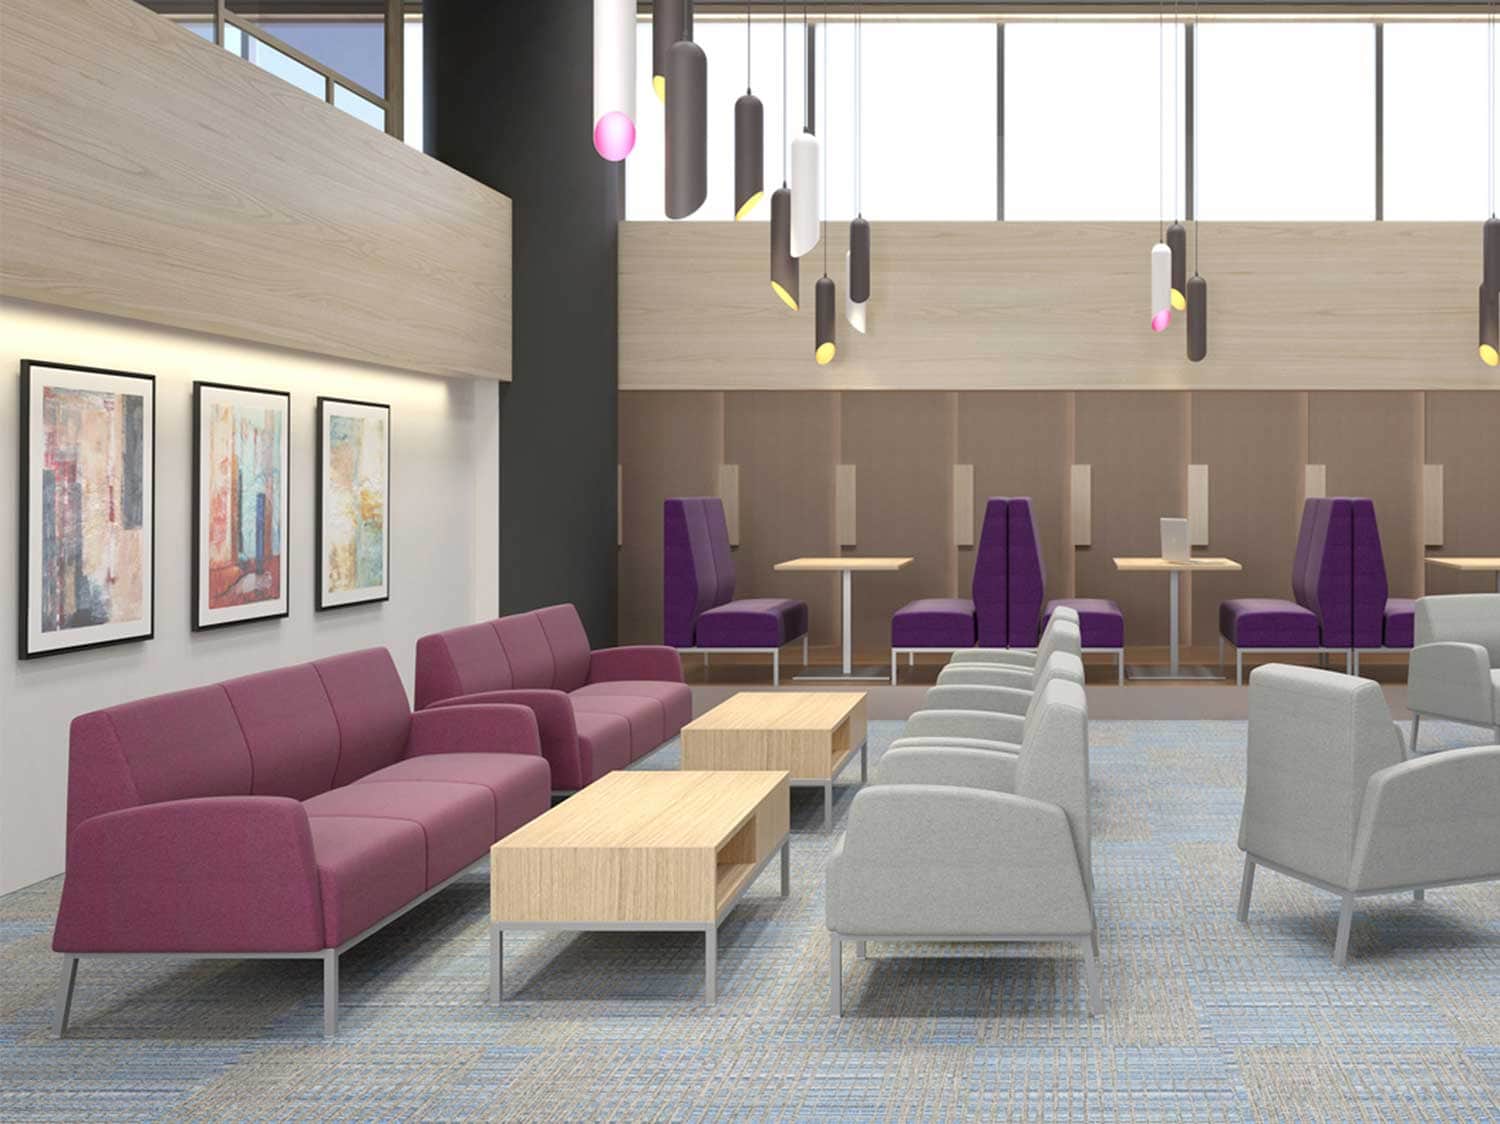 Tanner Student Lounge Furniture on Campus from Sauder Education.